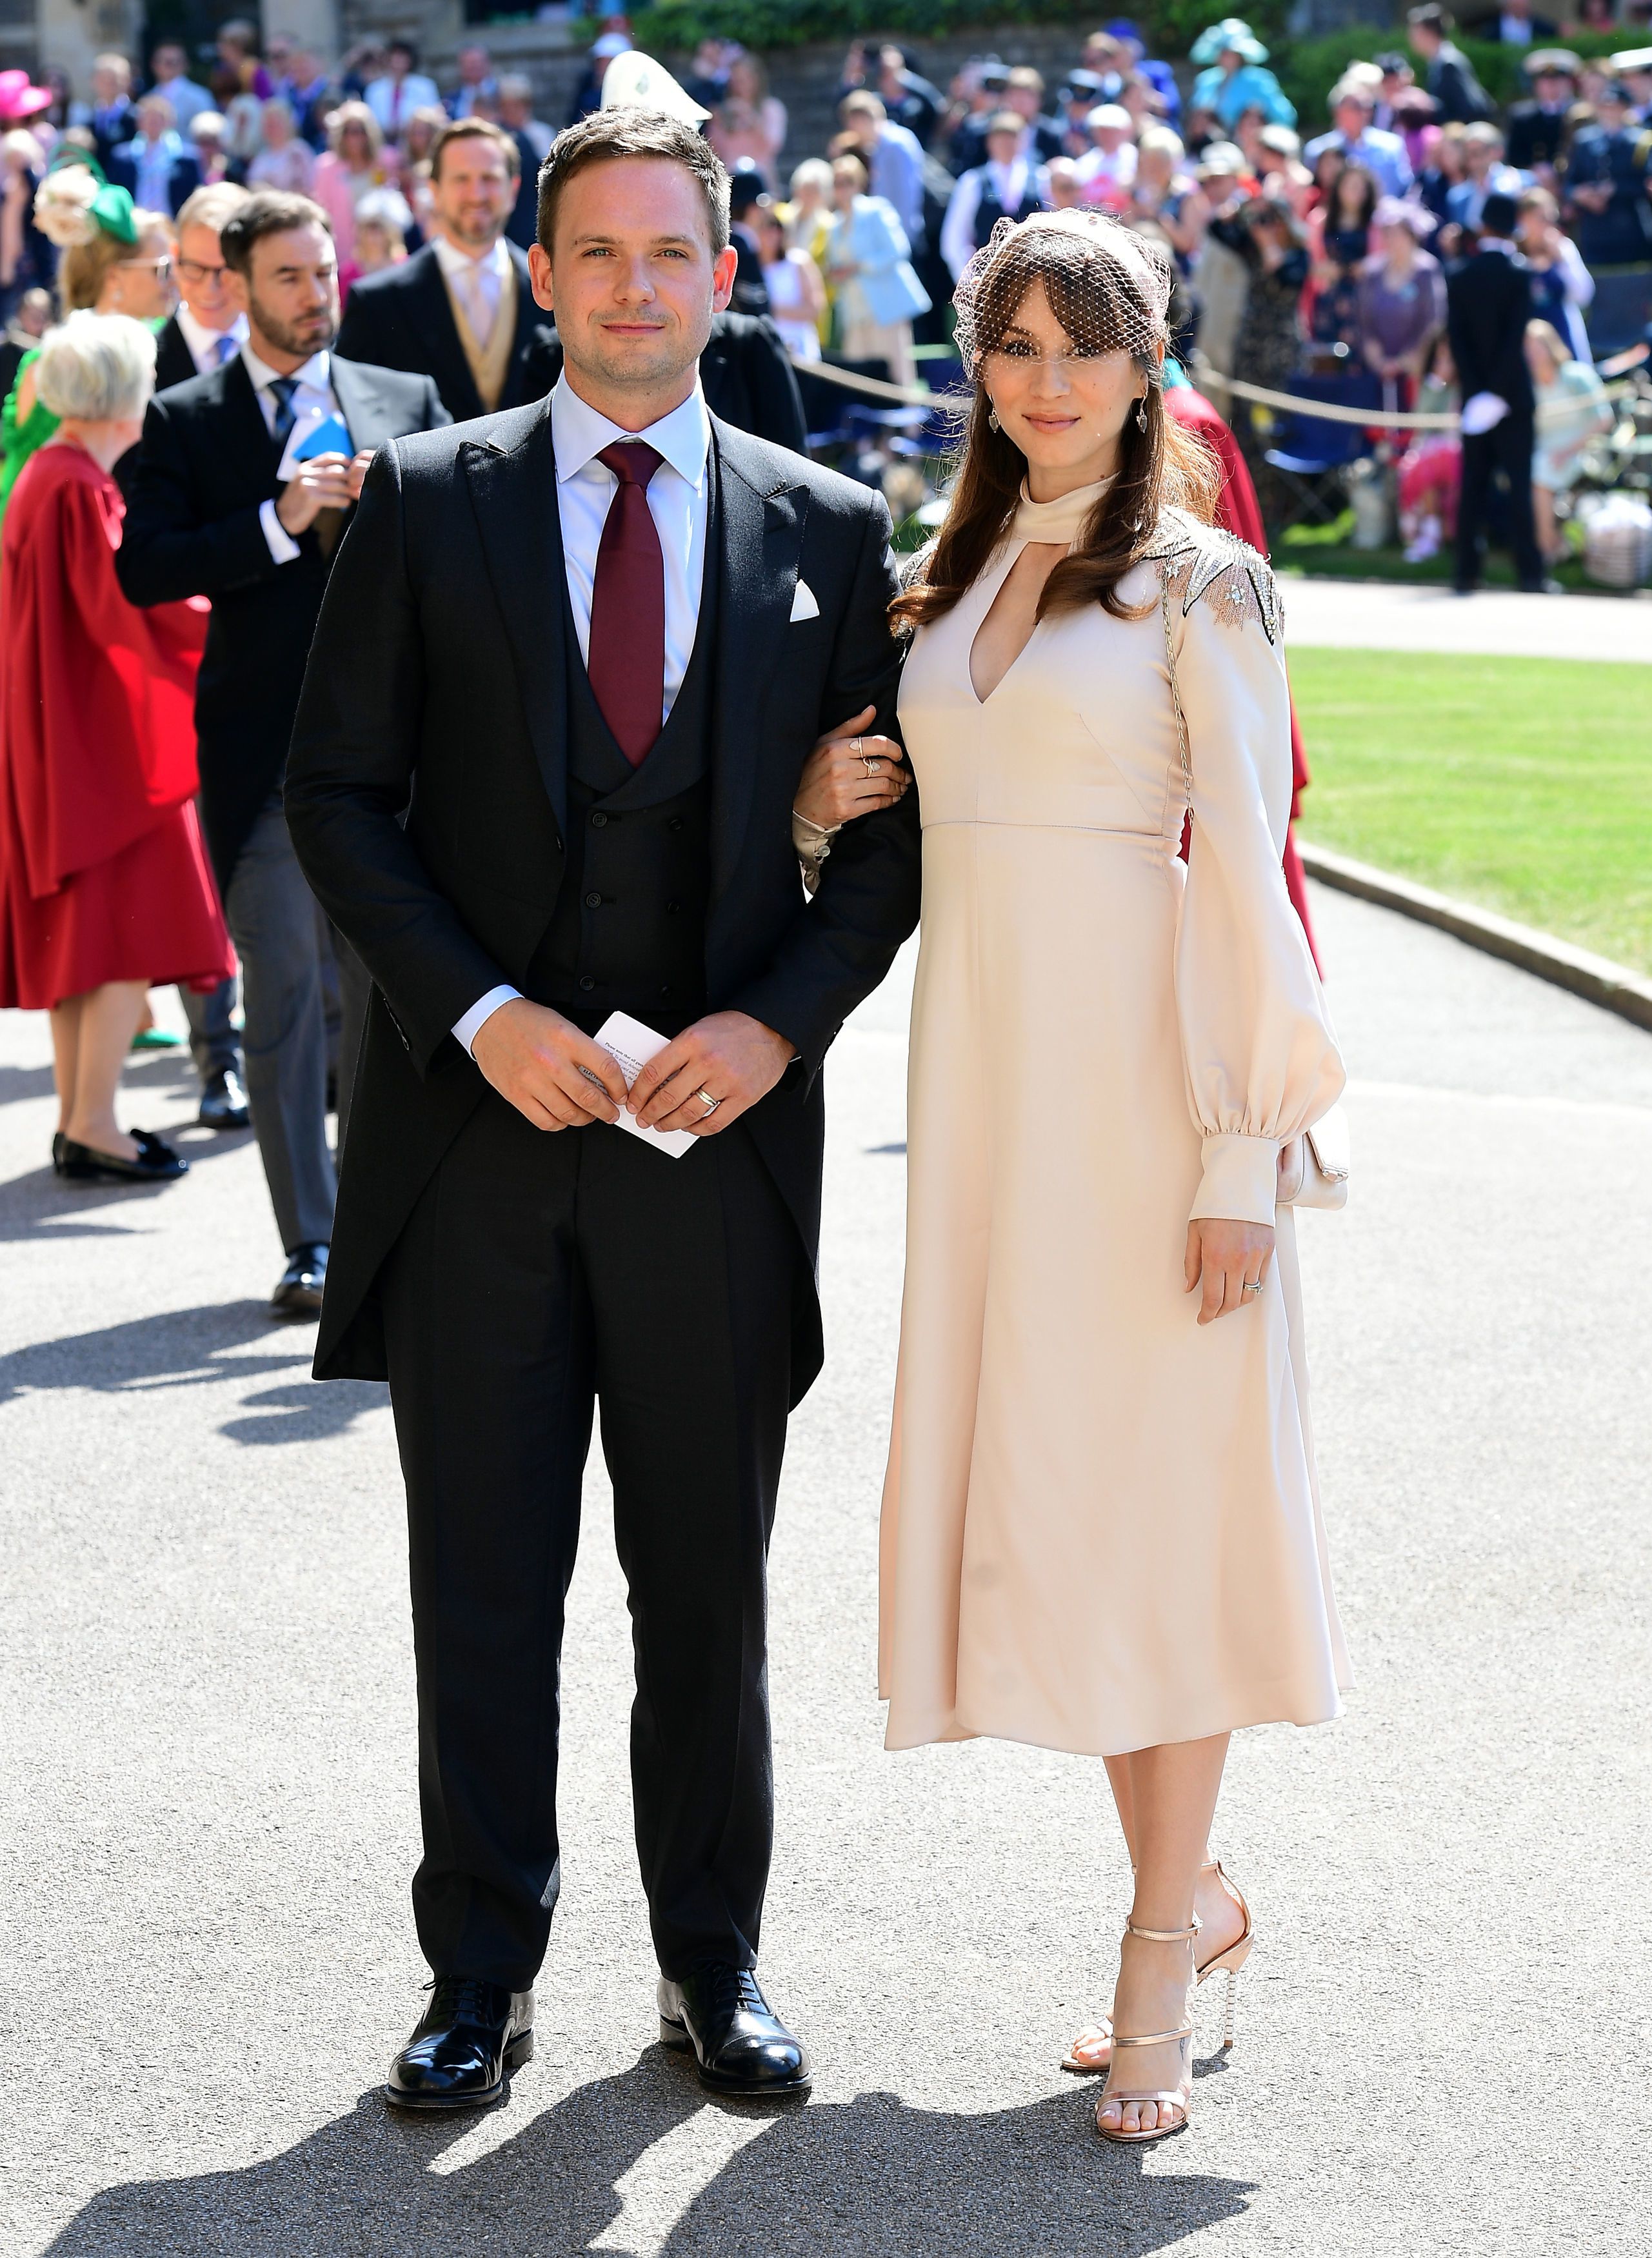 Suits Star Patrick J Adams Hits Back At Woman Who Fat-Shamed His Royal Wedding Appearance picture